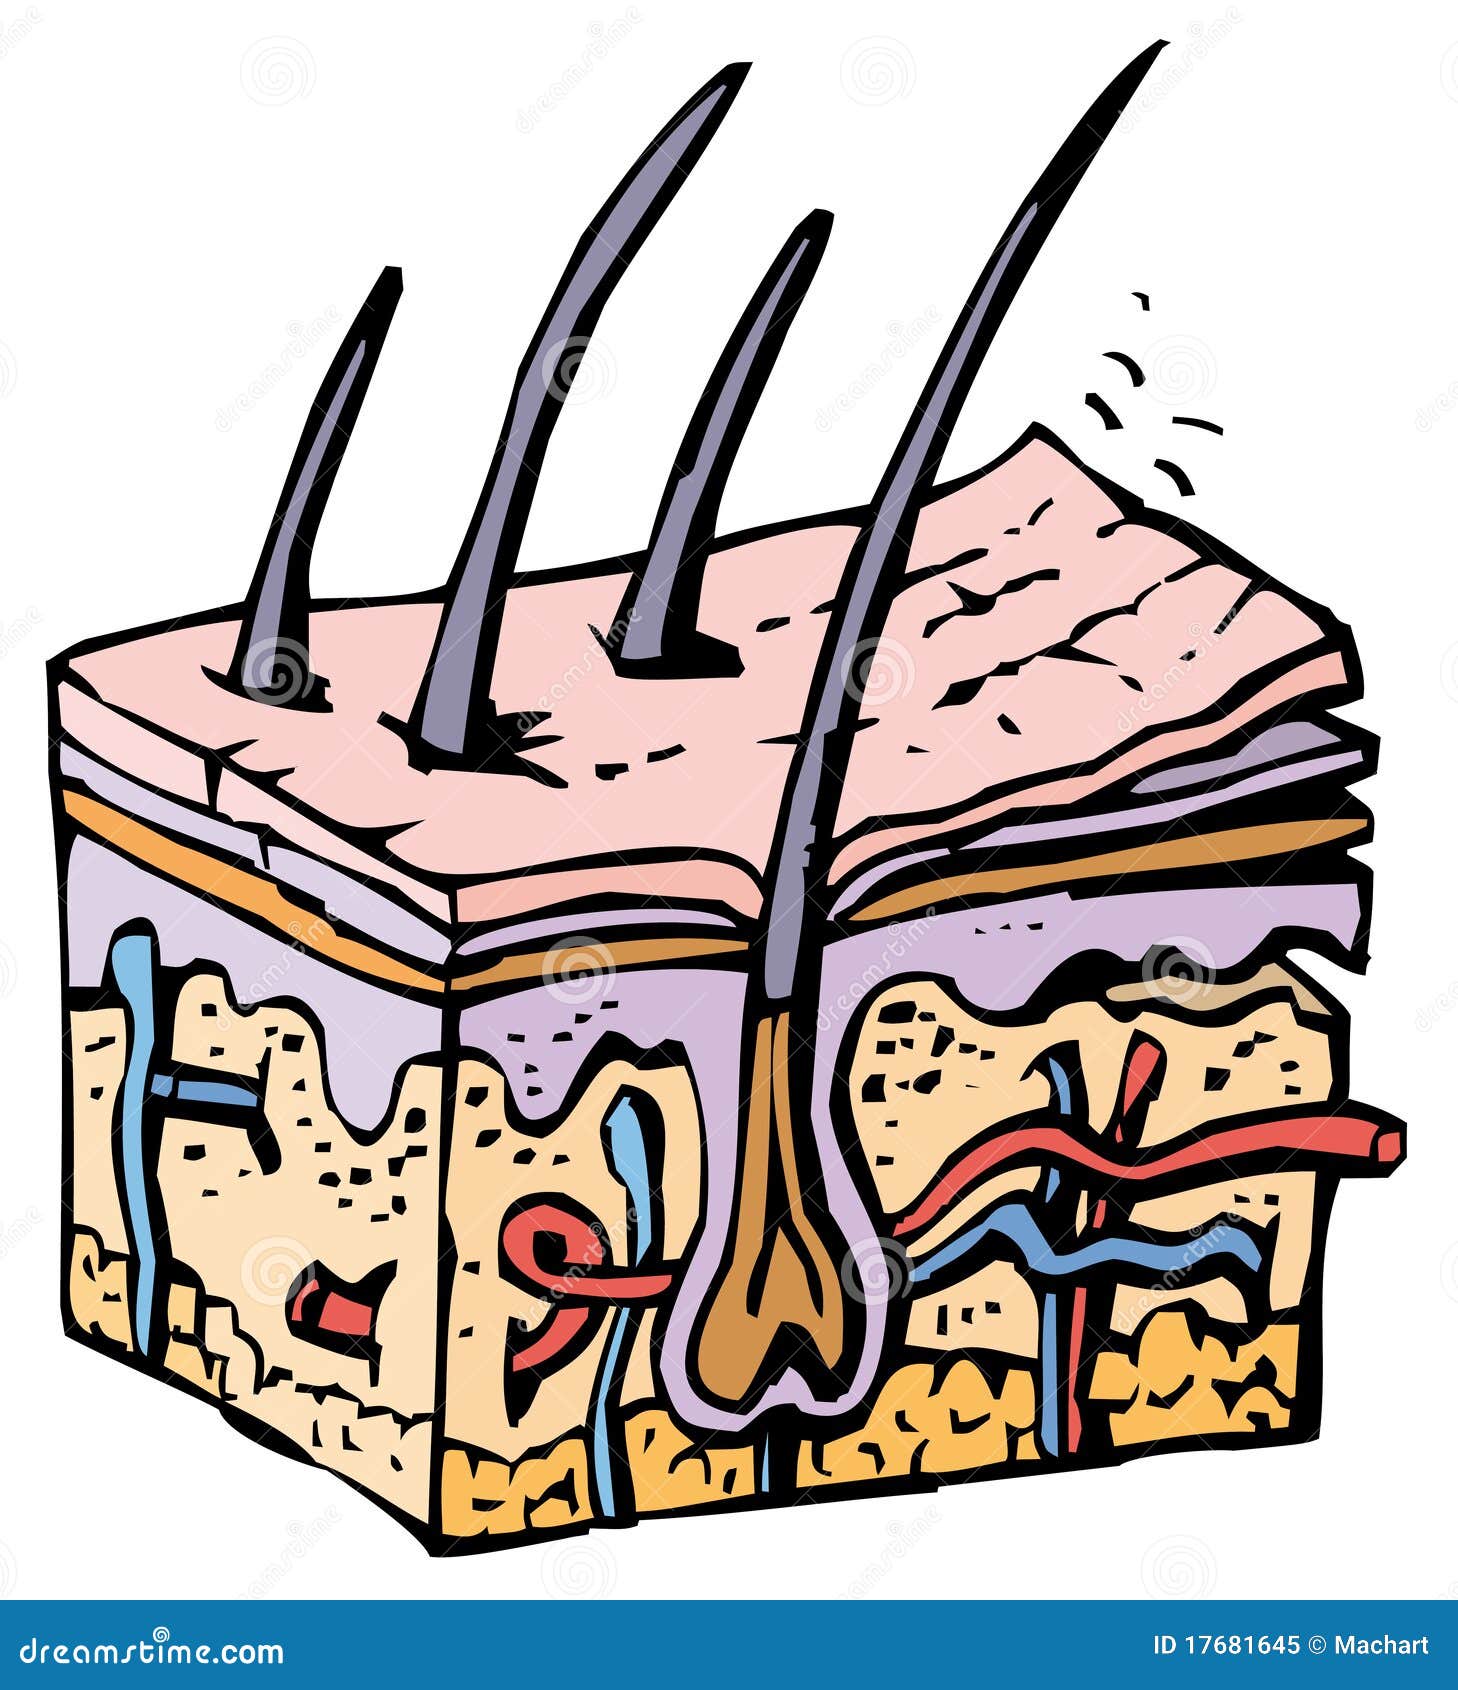 clipart of human tissue - photo #18